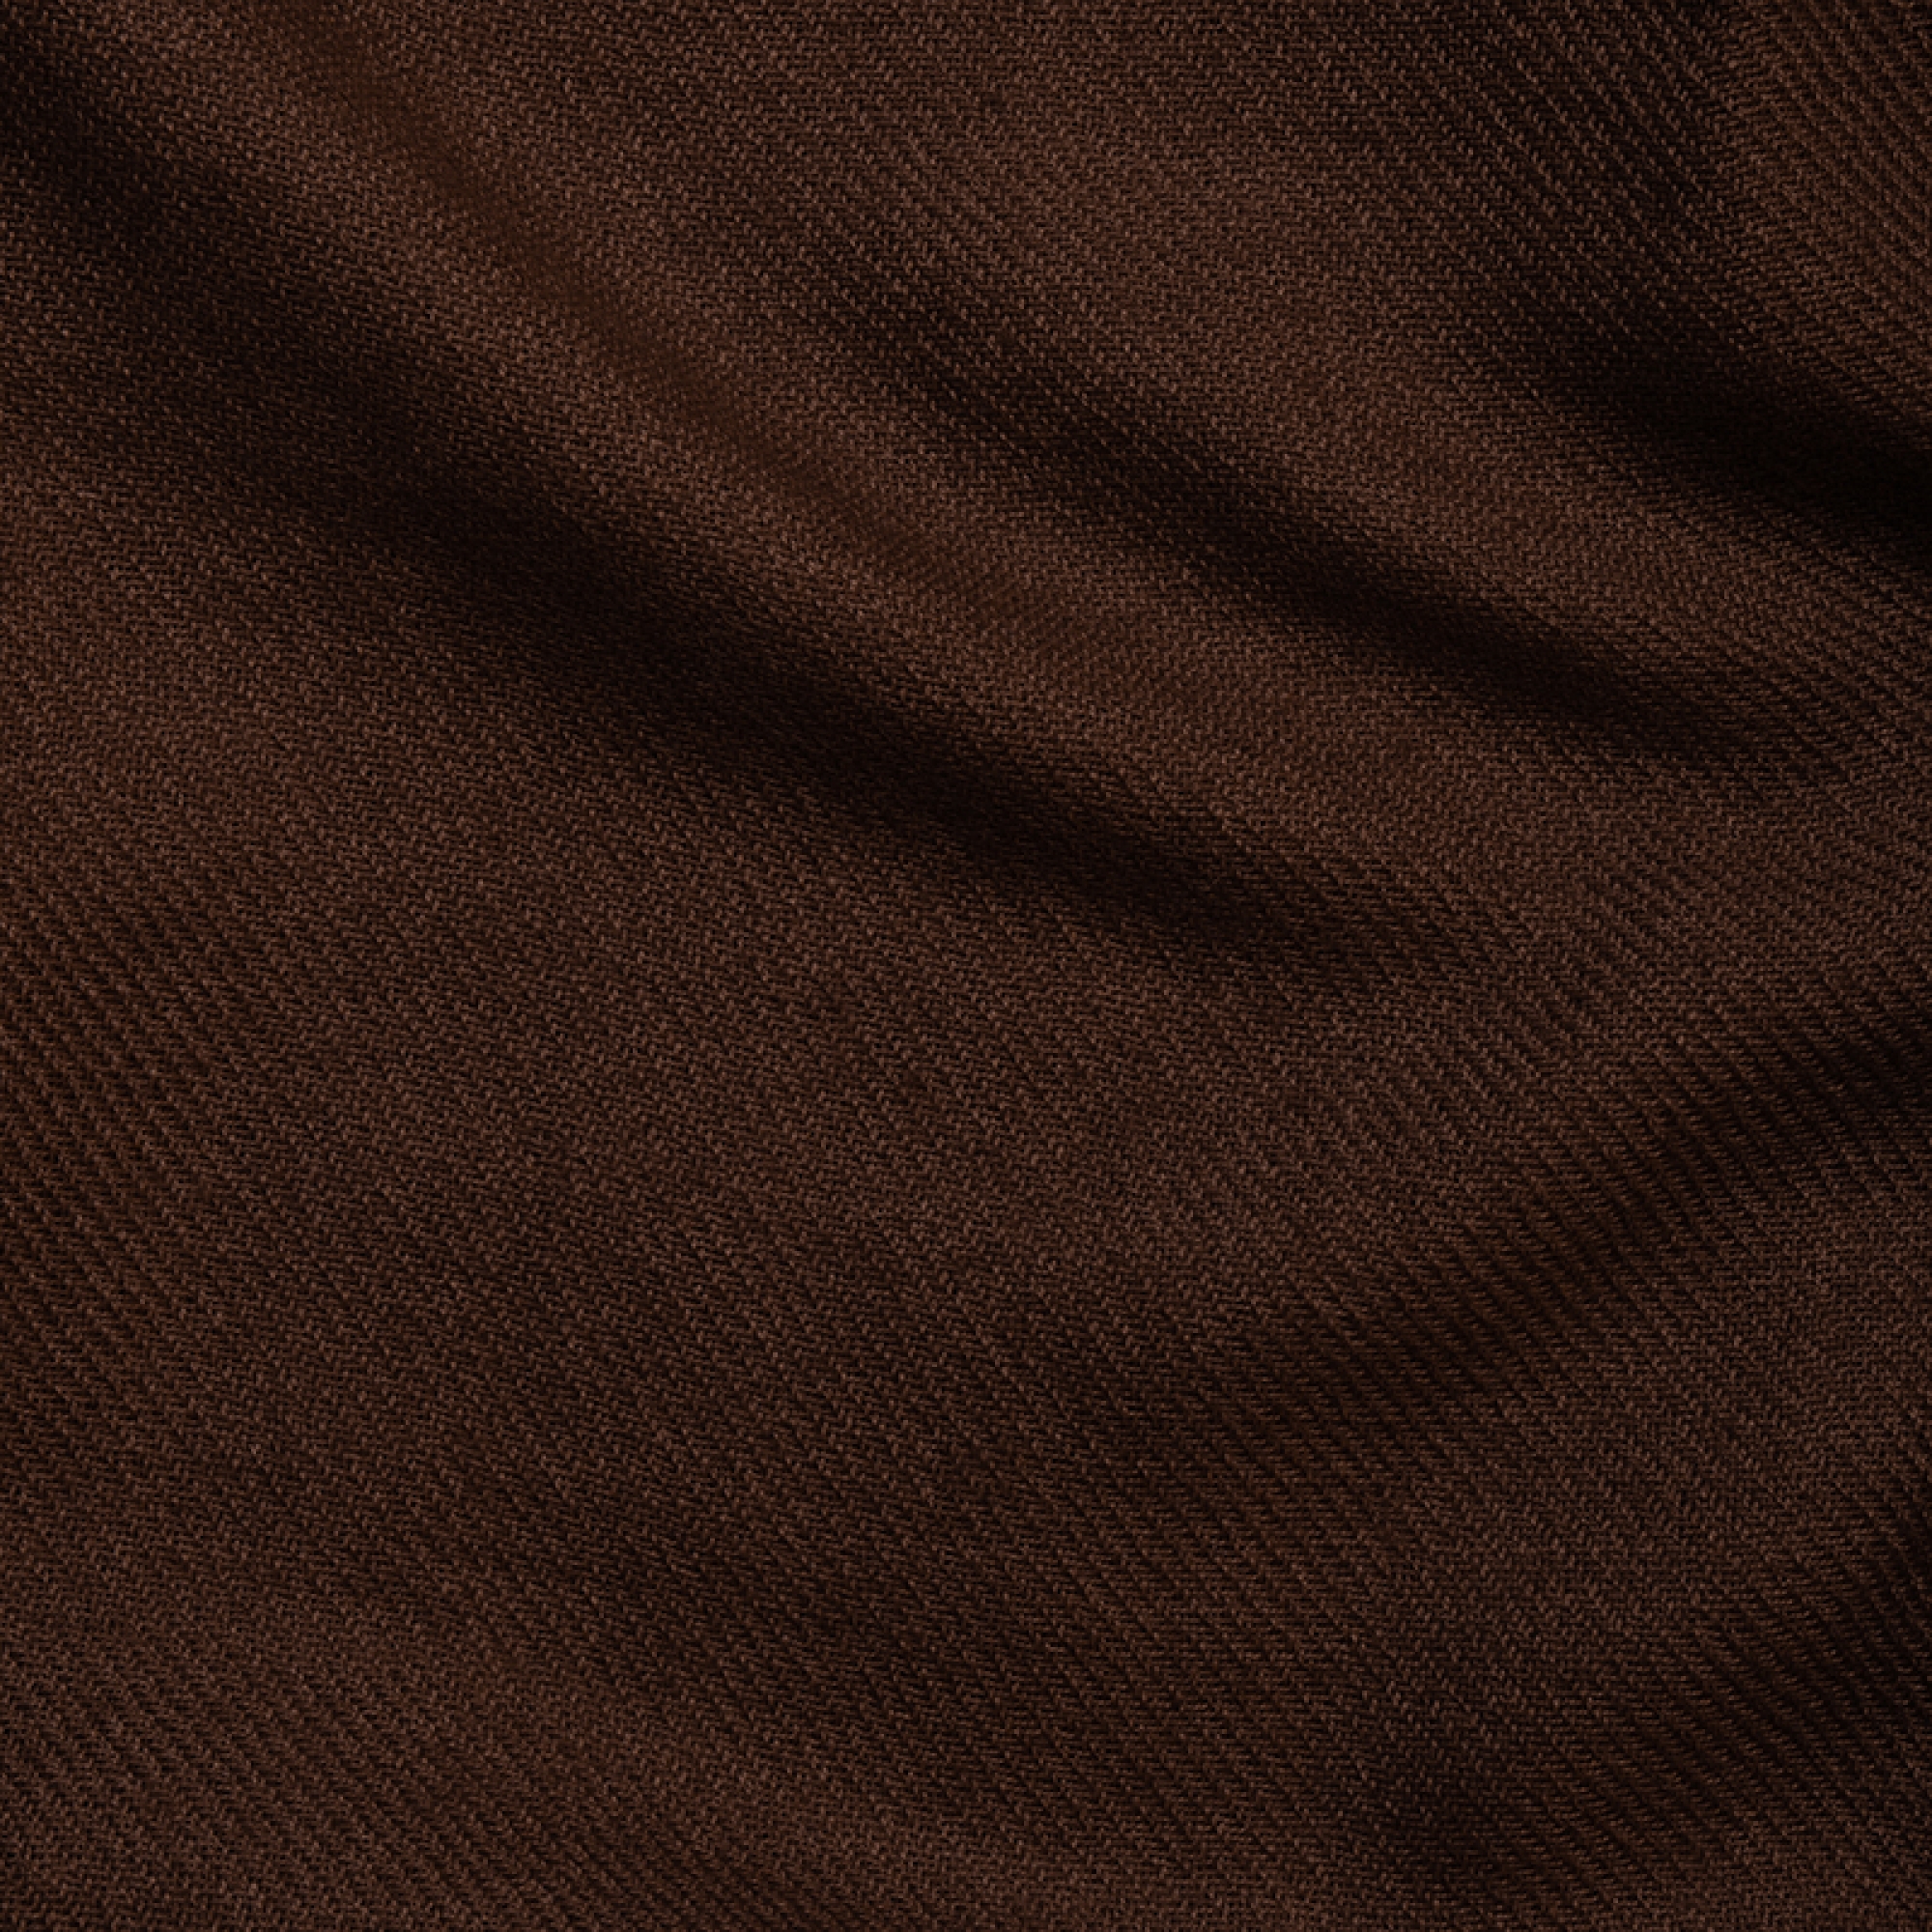 Cashmere accessories exclusive toodoo plain xl 240 x 260 cacao 240 x 260 cm